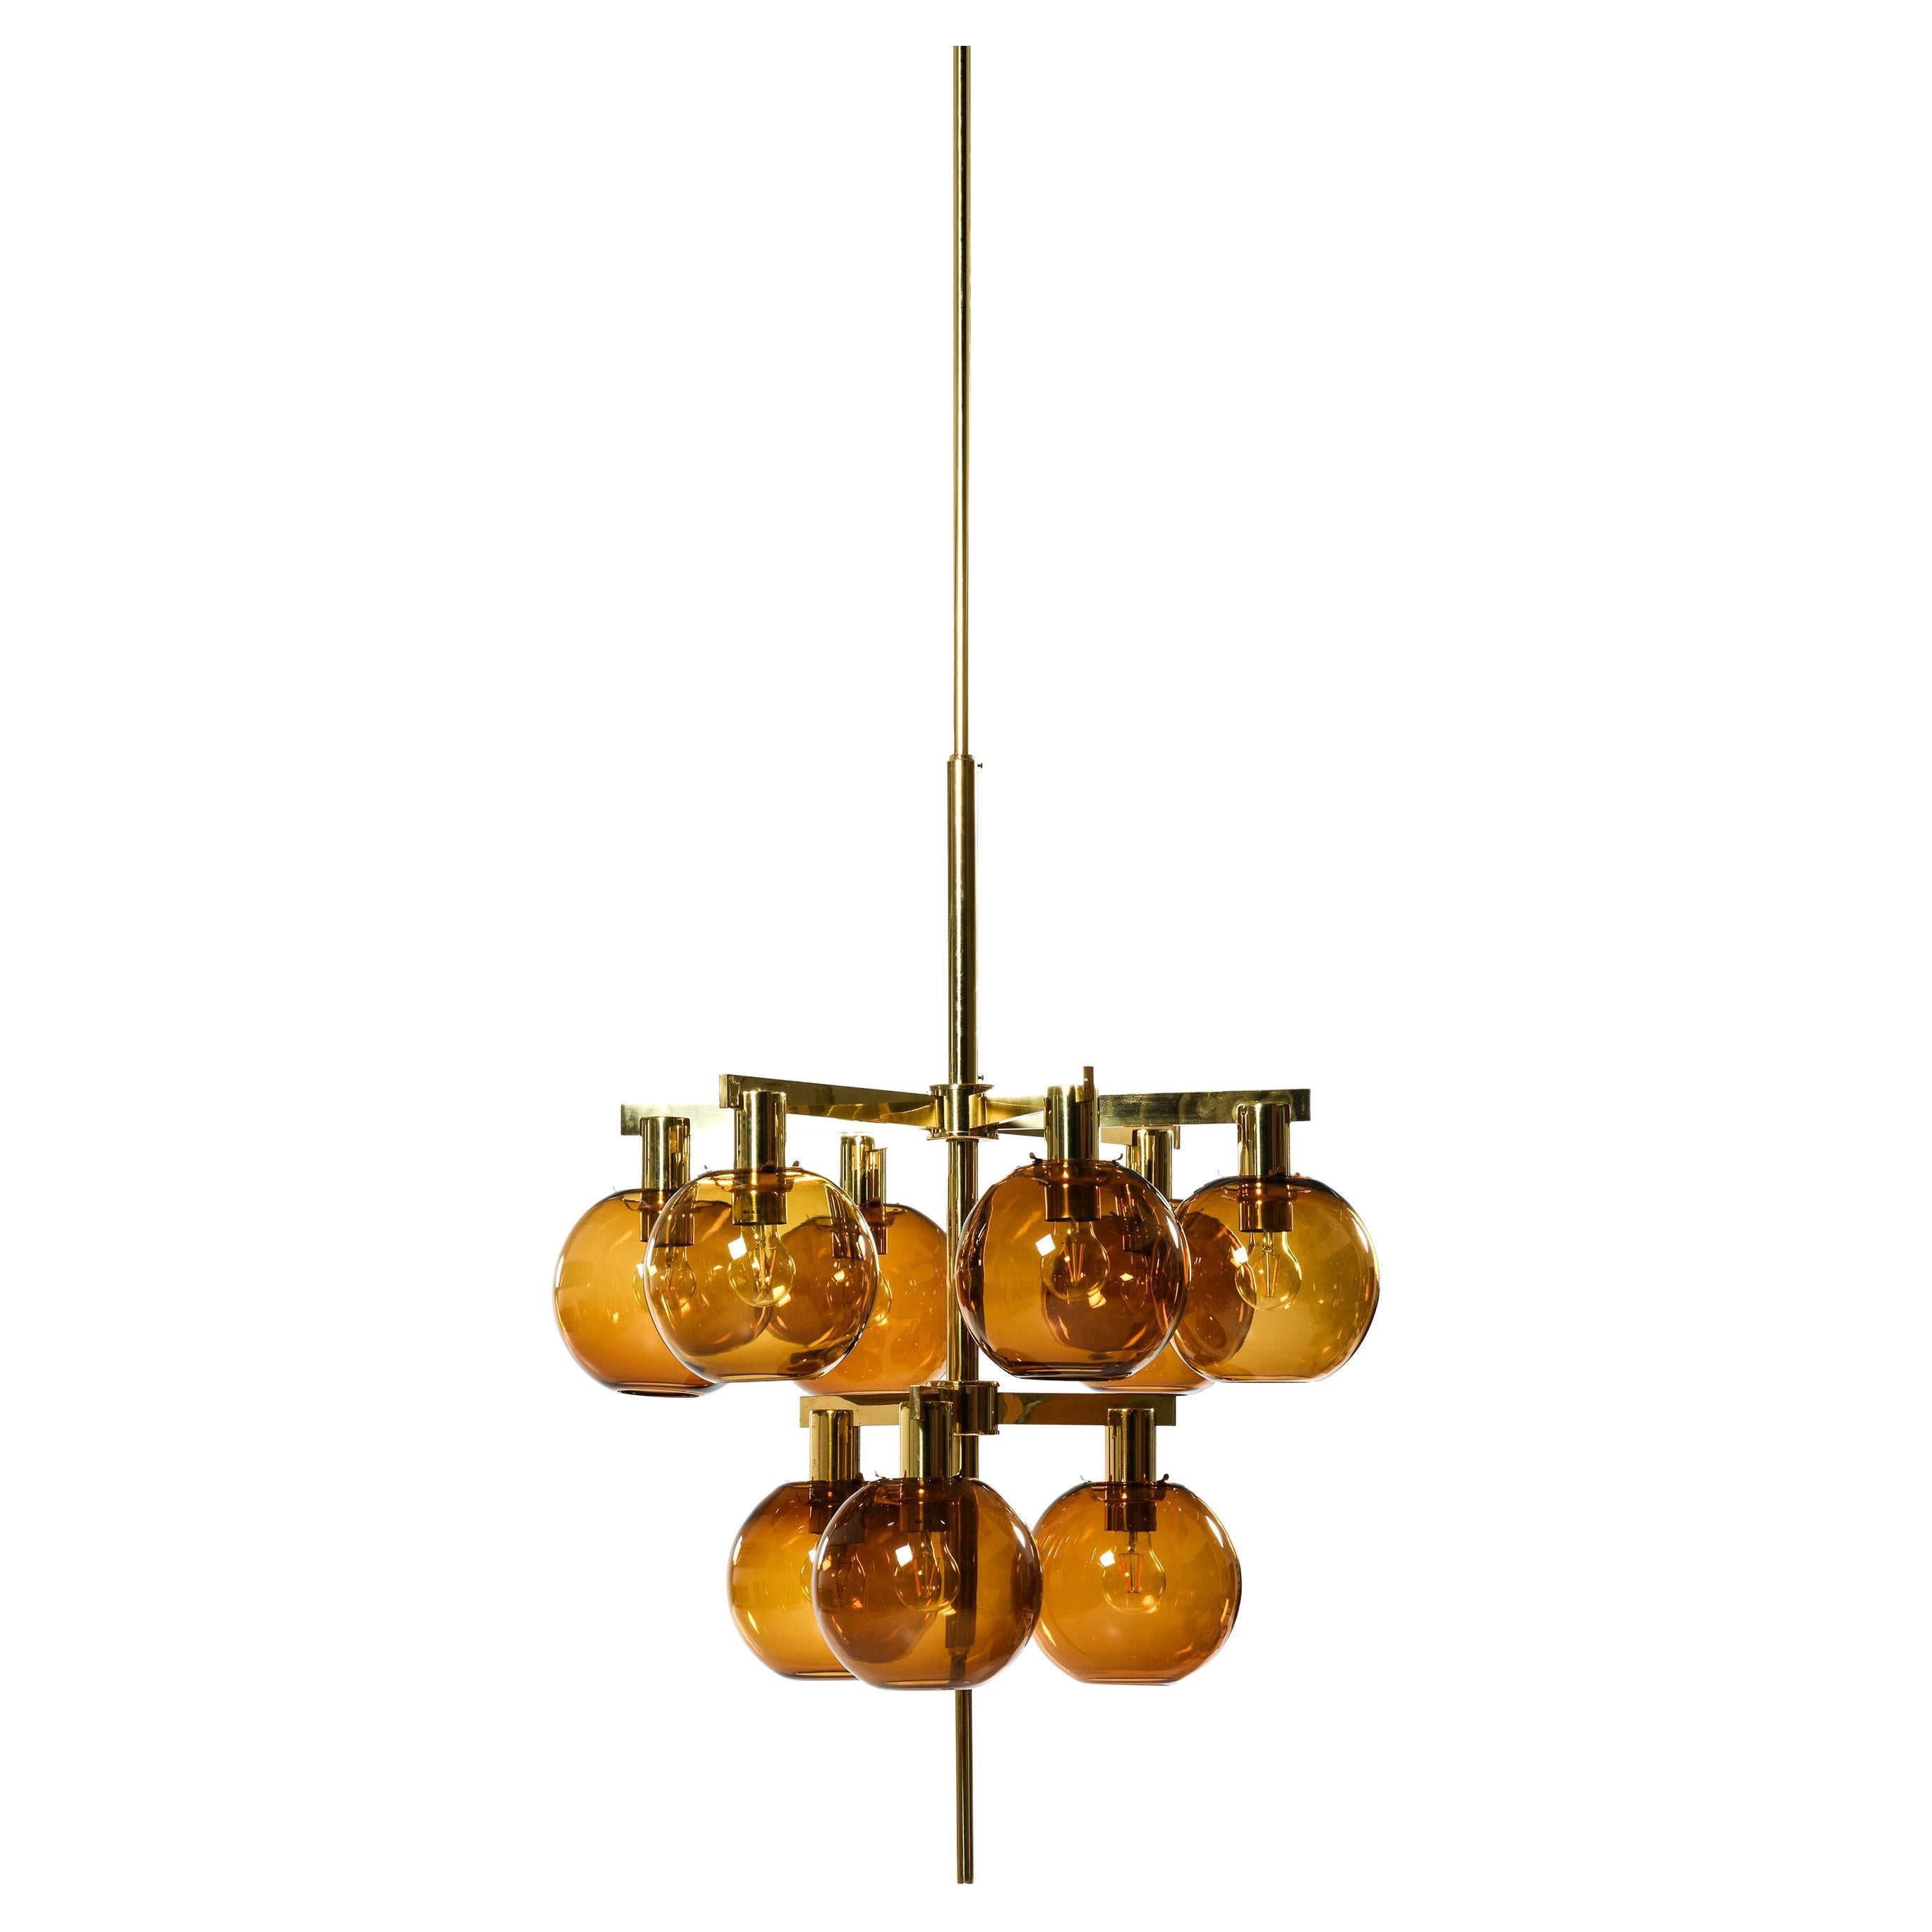 Ceiling Lamp Chandelier in Brass and Amber Glass by Hans-Agne Jakobsson, 1950's For Sale